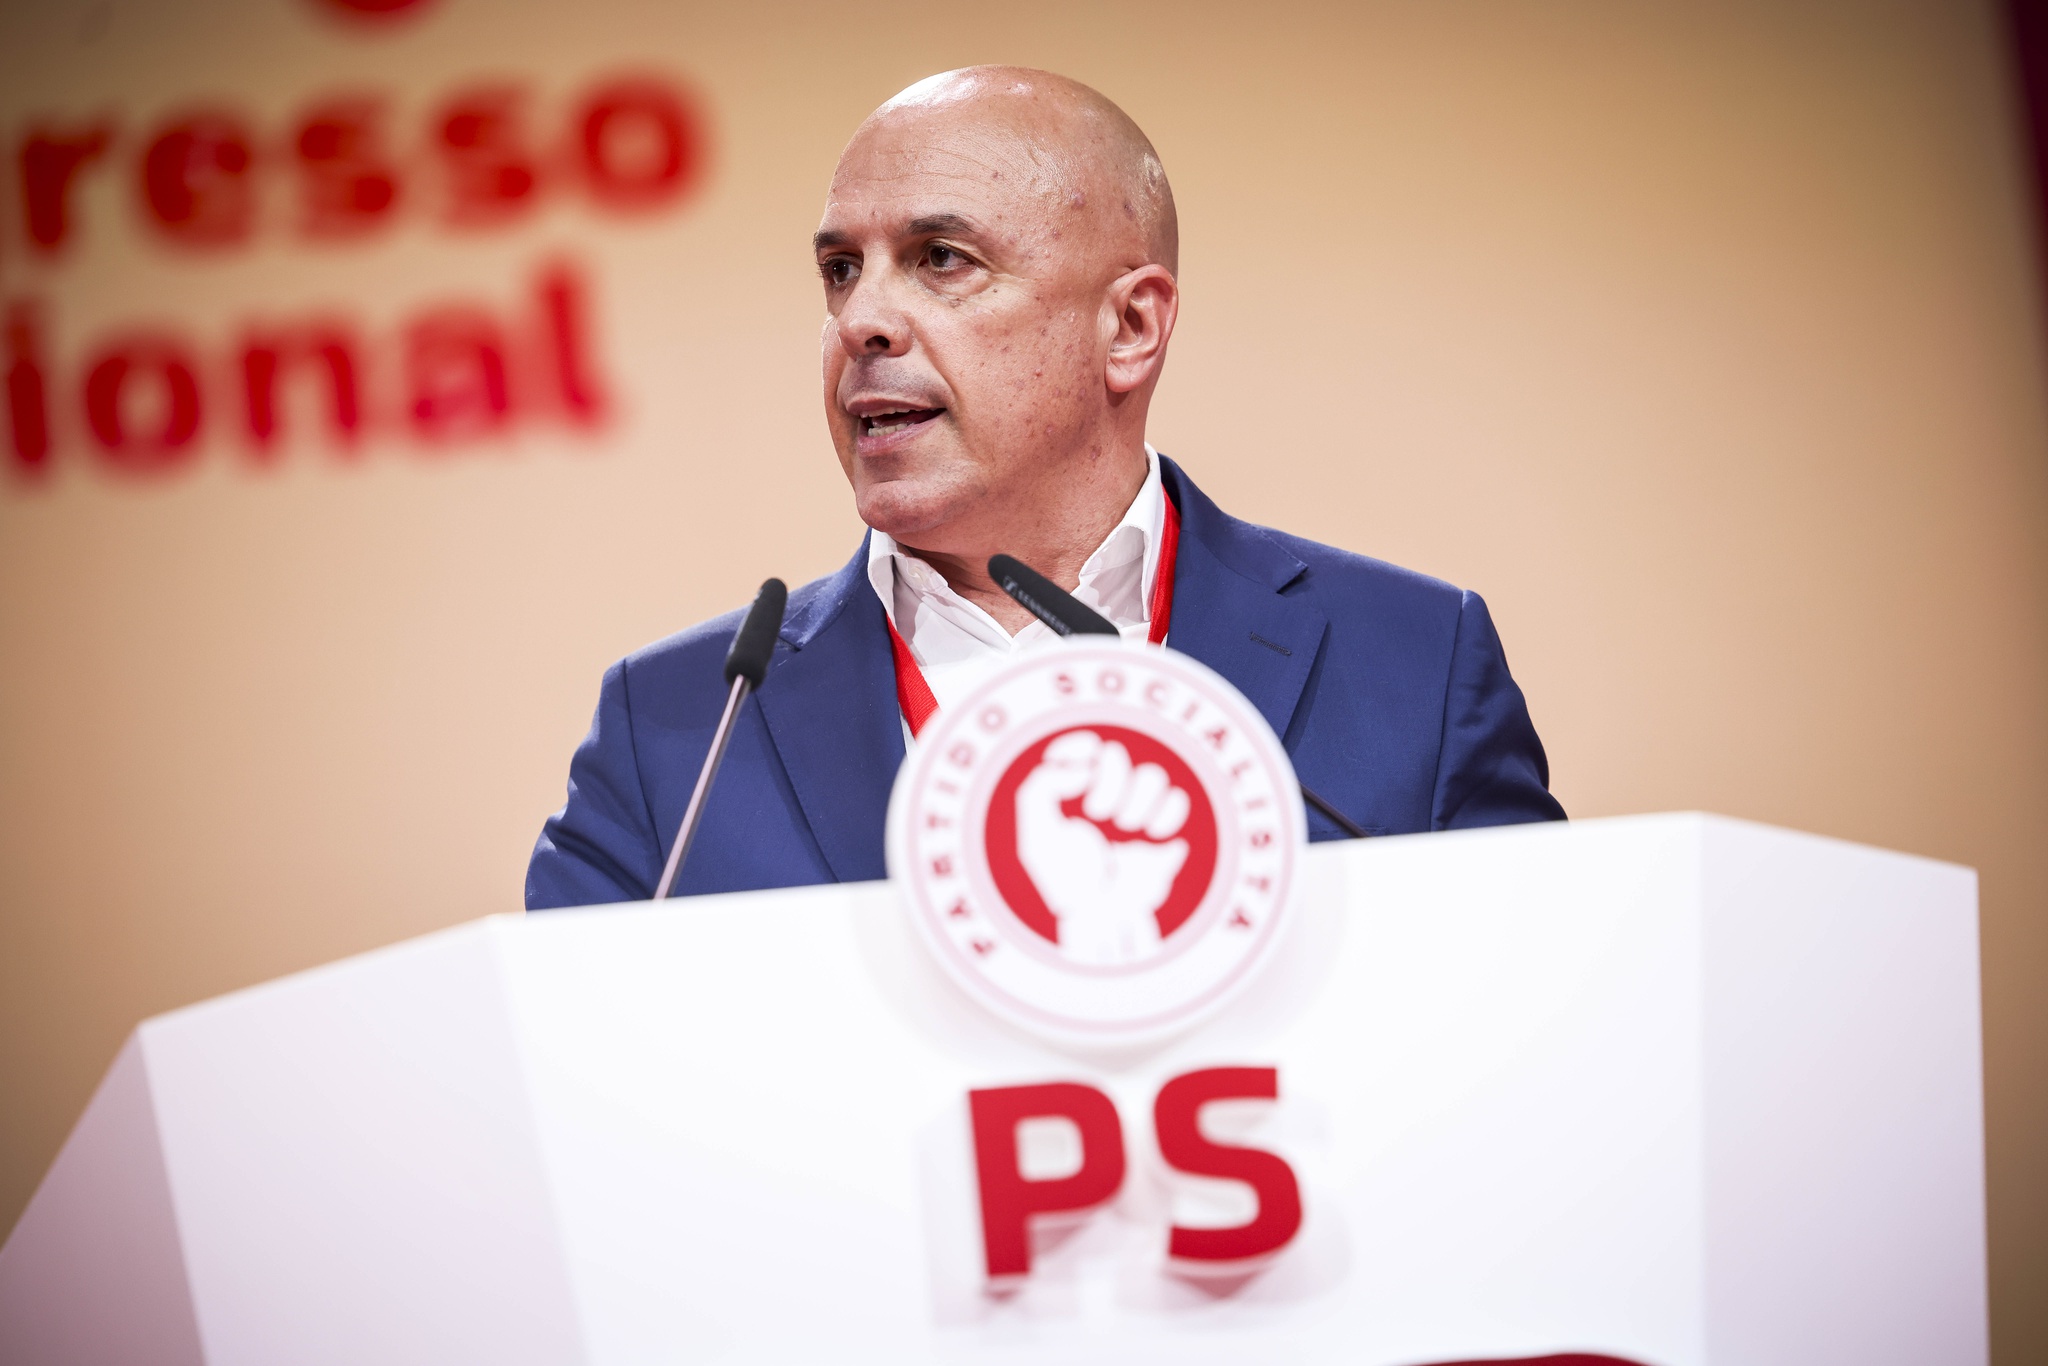 PS demands that Miguel Albuquerque not “take refuge” in immunity and resign |  Paulo Cafôfo